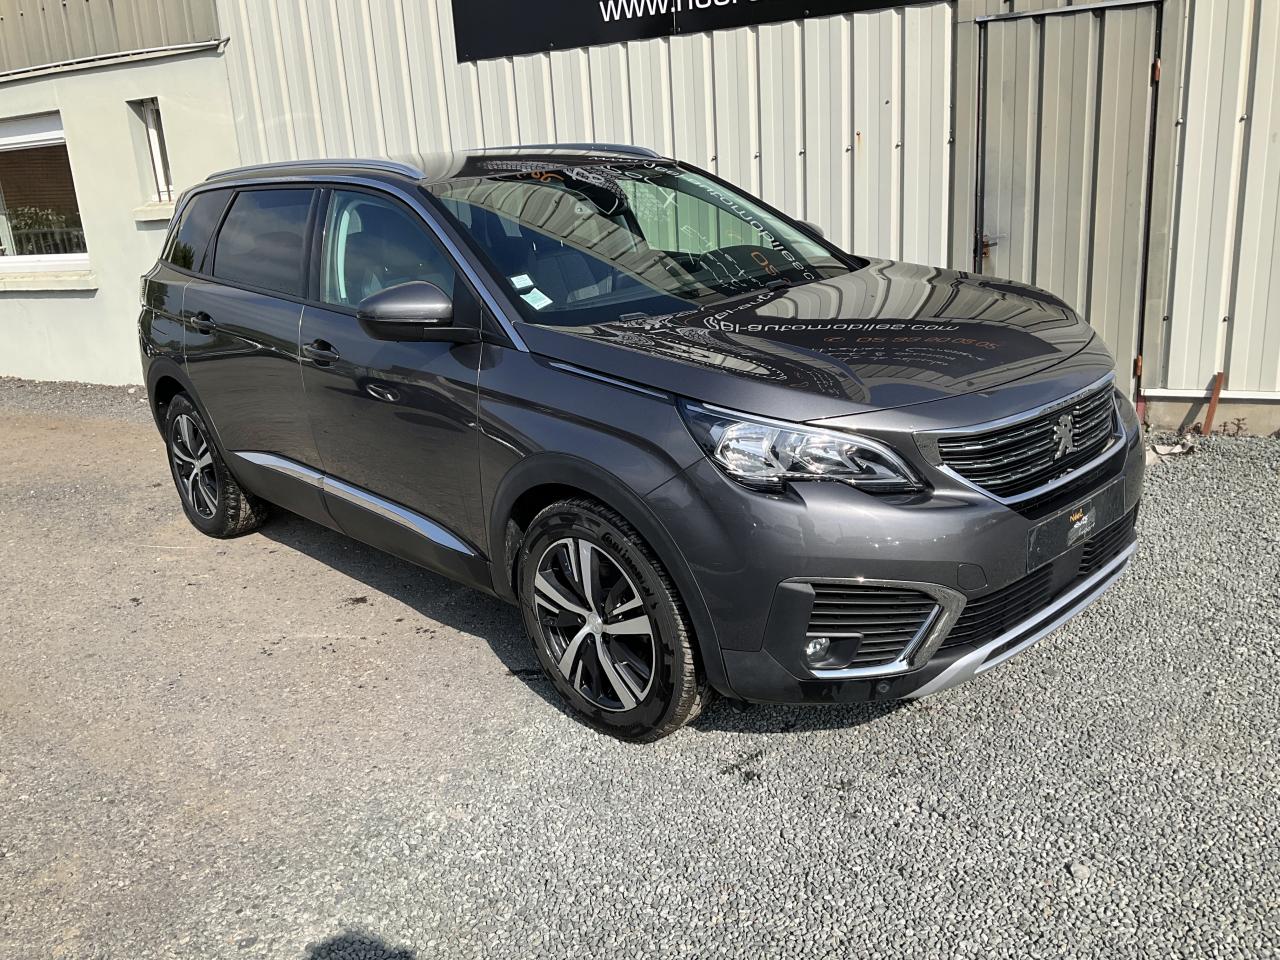 PEUGEOT-5008-ALLURE 1.5 HDI 130 CH 7 PLACES